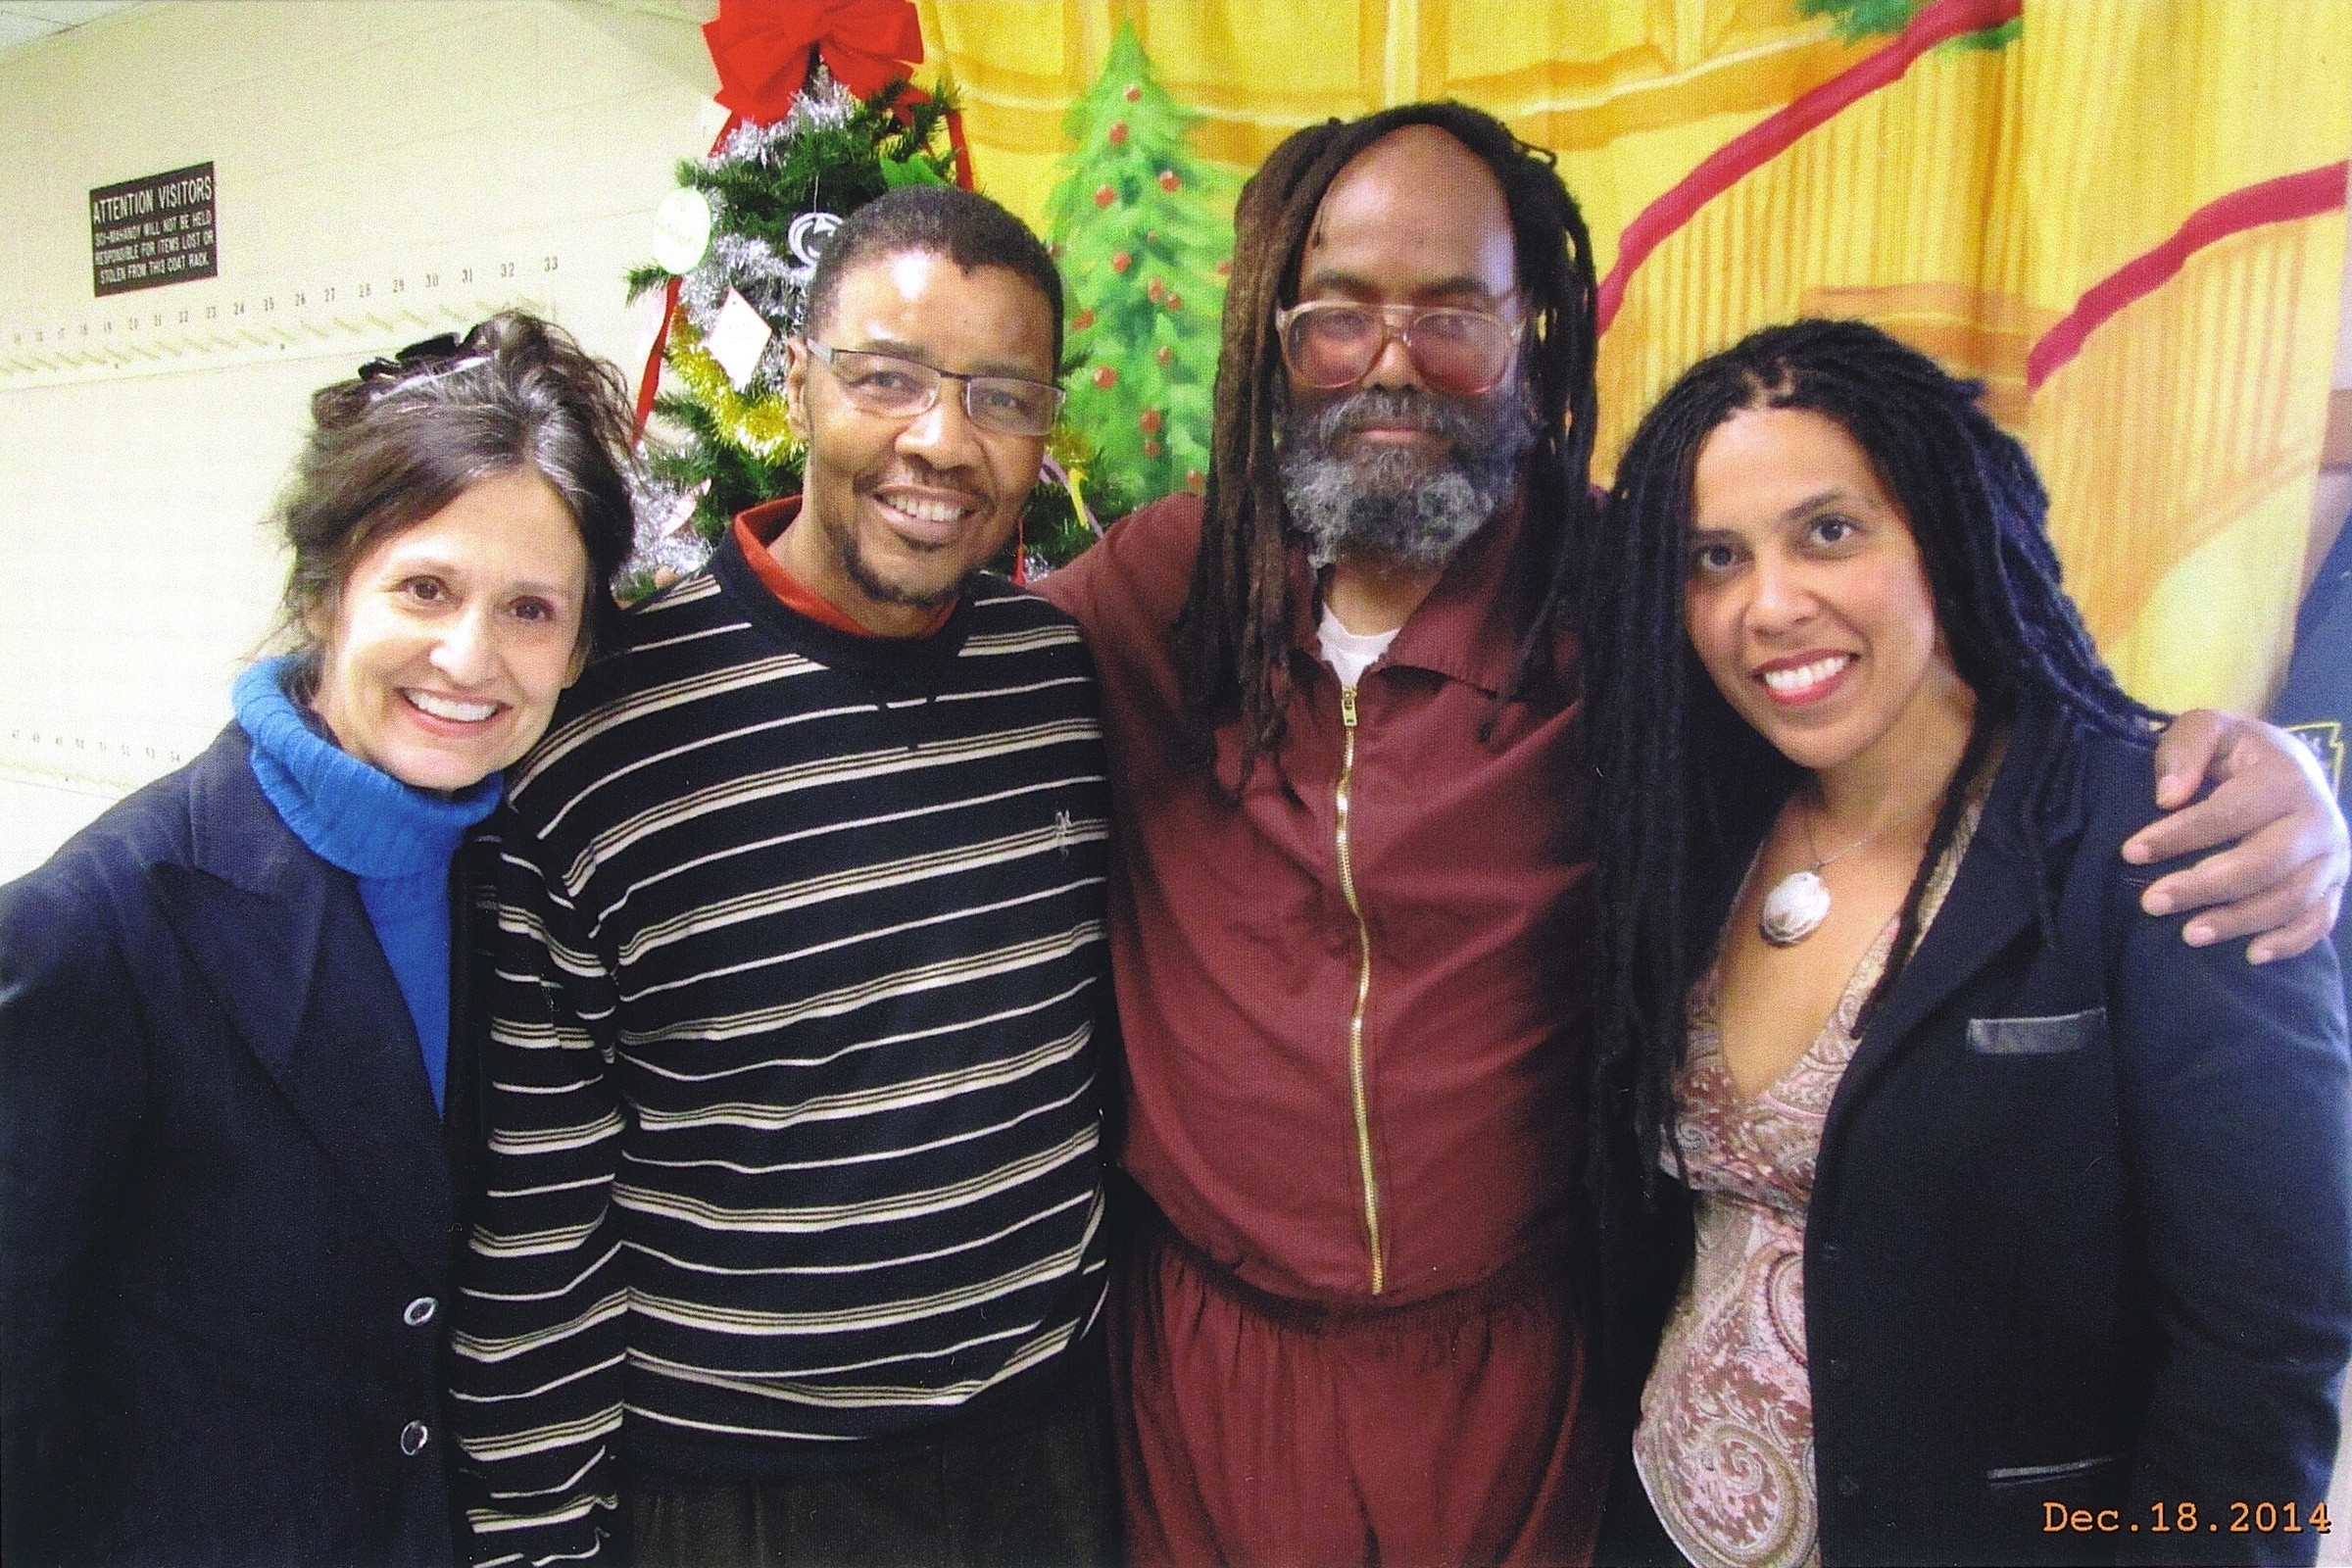 A Slow Death for Mumia Abu-Jamal and Thousands of Prisoners in America